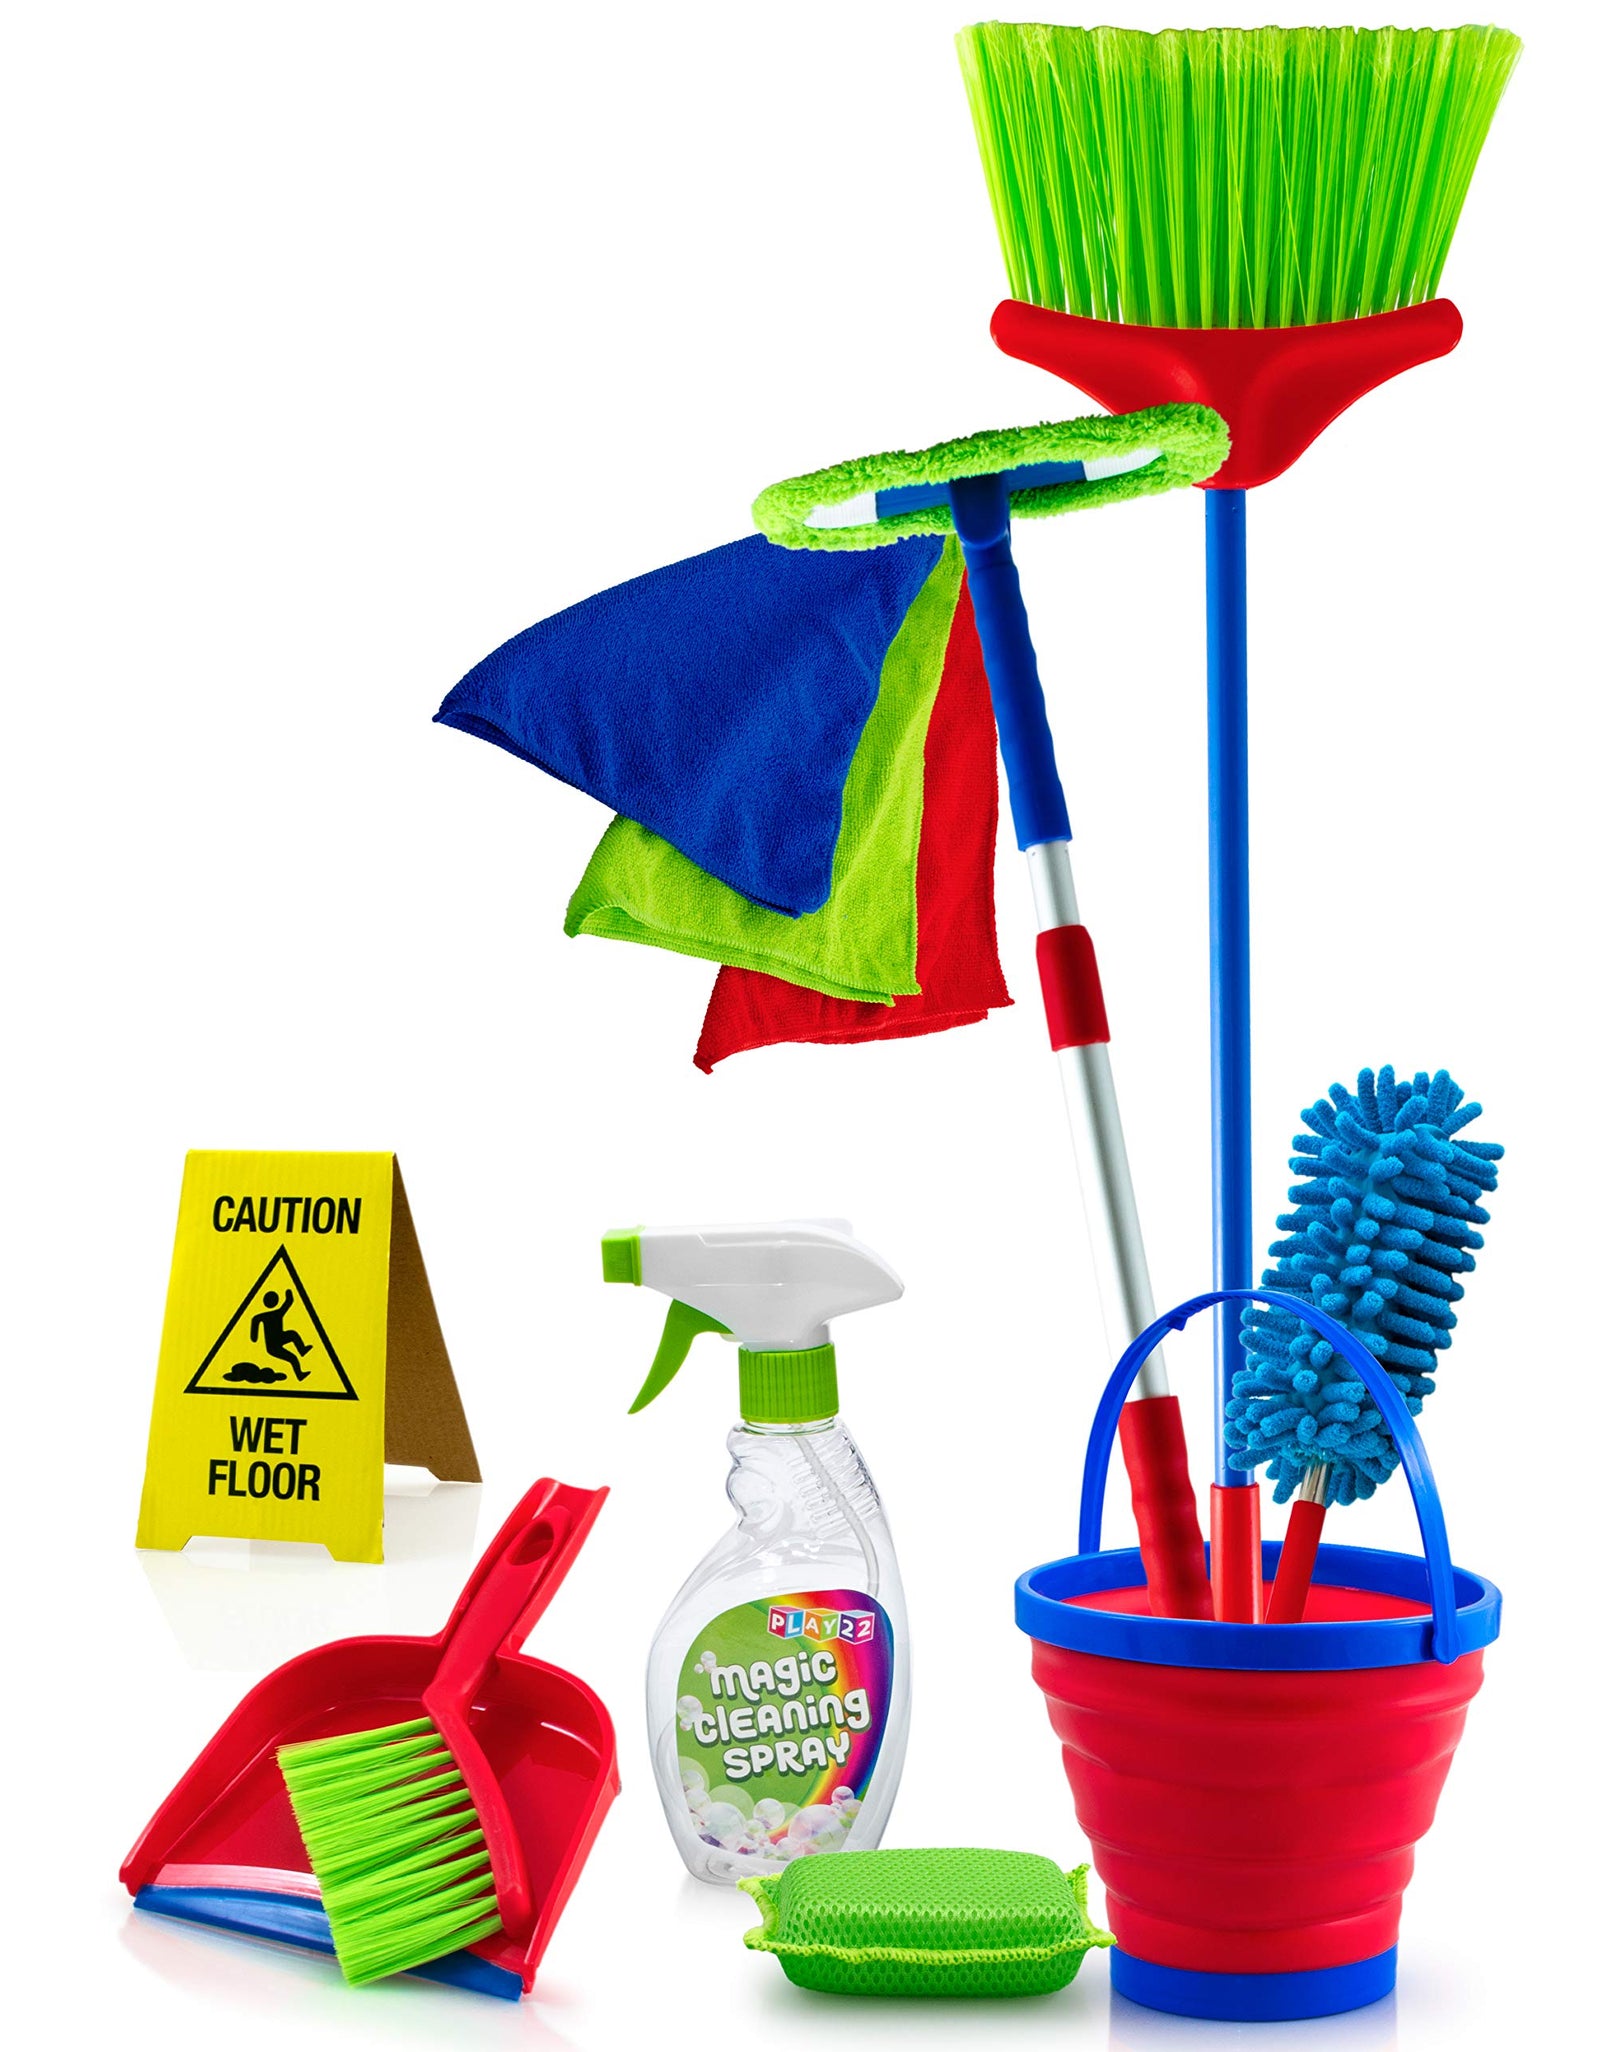 Play22 Kids Cleaning Set 12 Piece - Toy Cleaning Set Includes Broom, Mop, Brush, Dust Pan, Duster, Sponge, Clothes, Spray, Bucket, Caution Sign, - Toy Kitchen Toddler Cleaning Set - Original